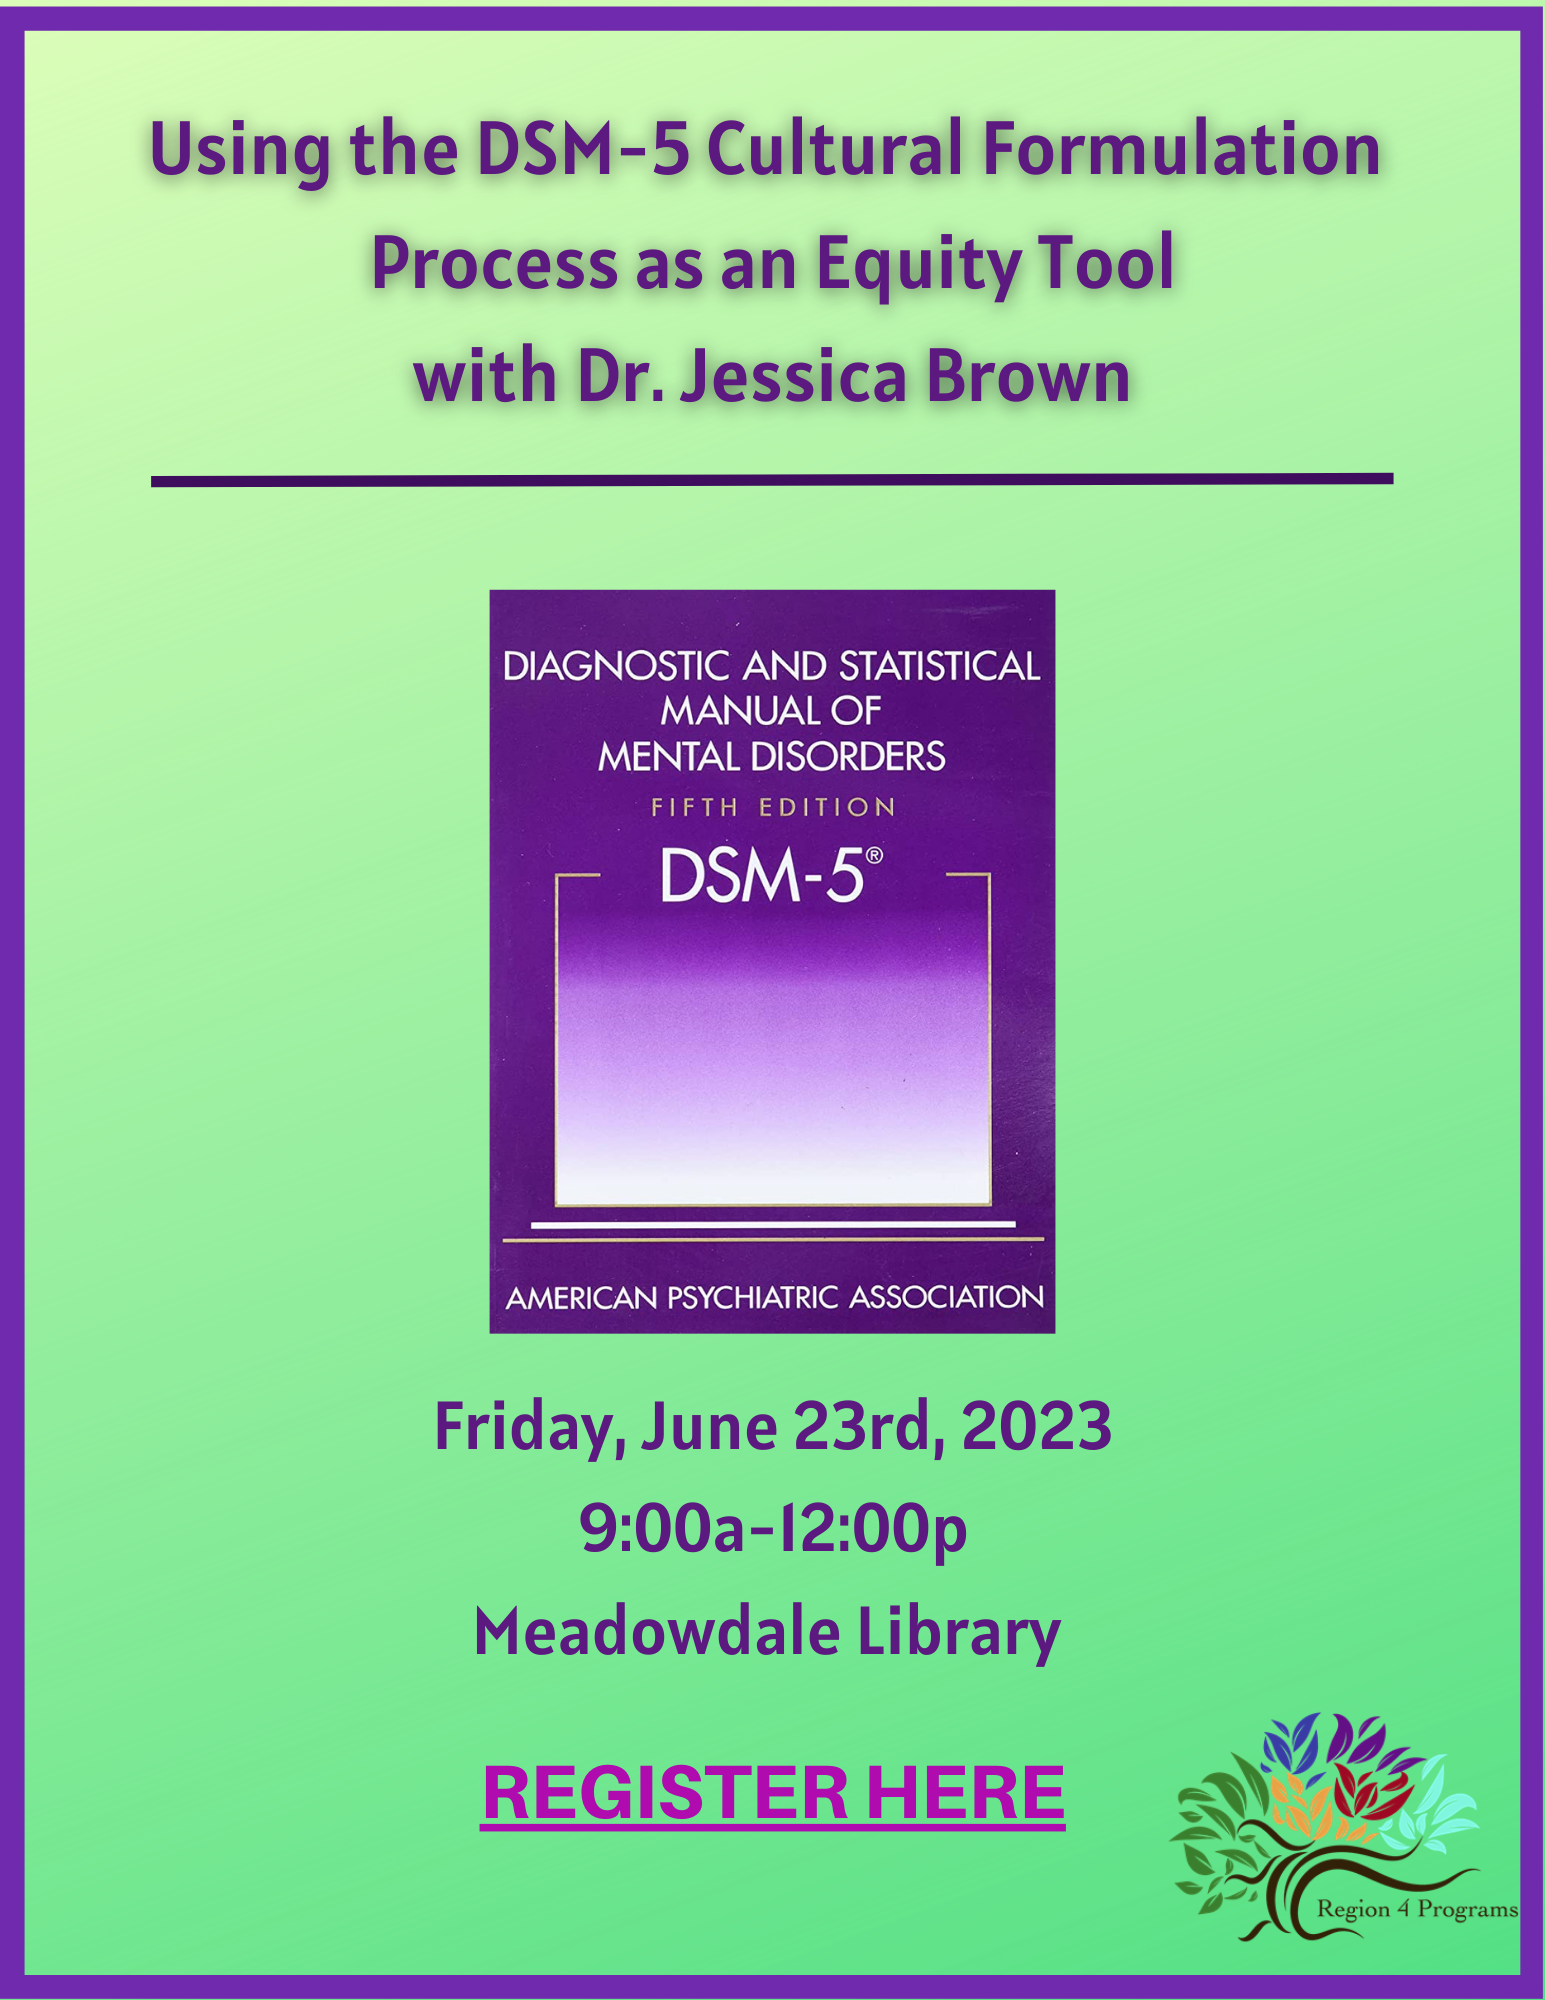 Using-the-DSM-5-Cultural-Formulation-Process-as-an-Equity-Tool